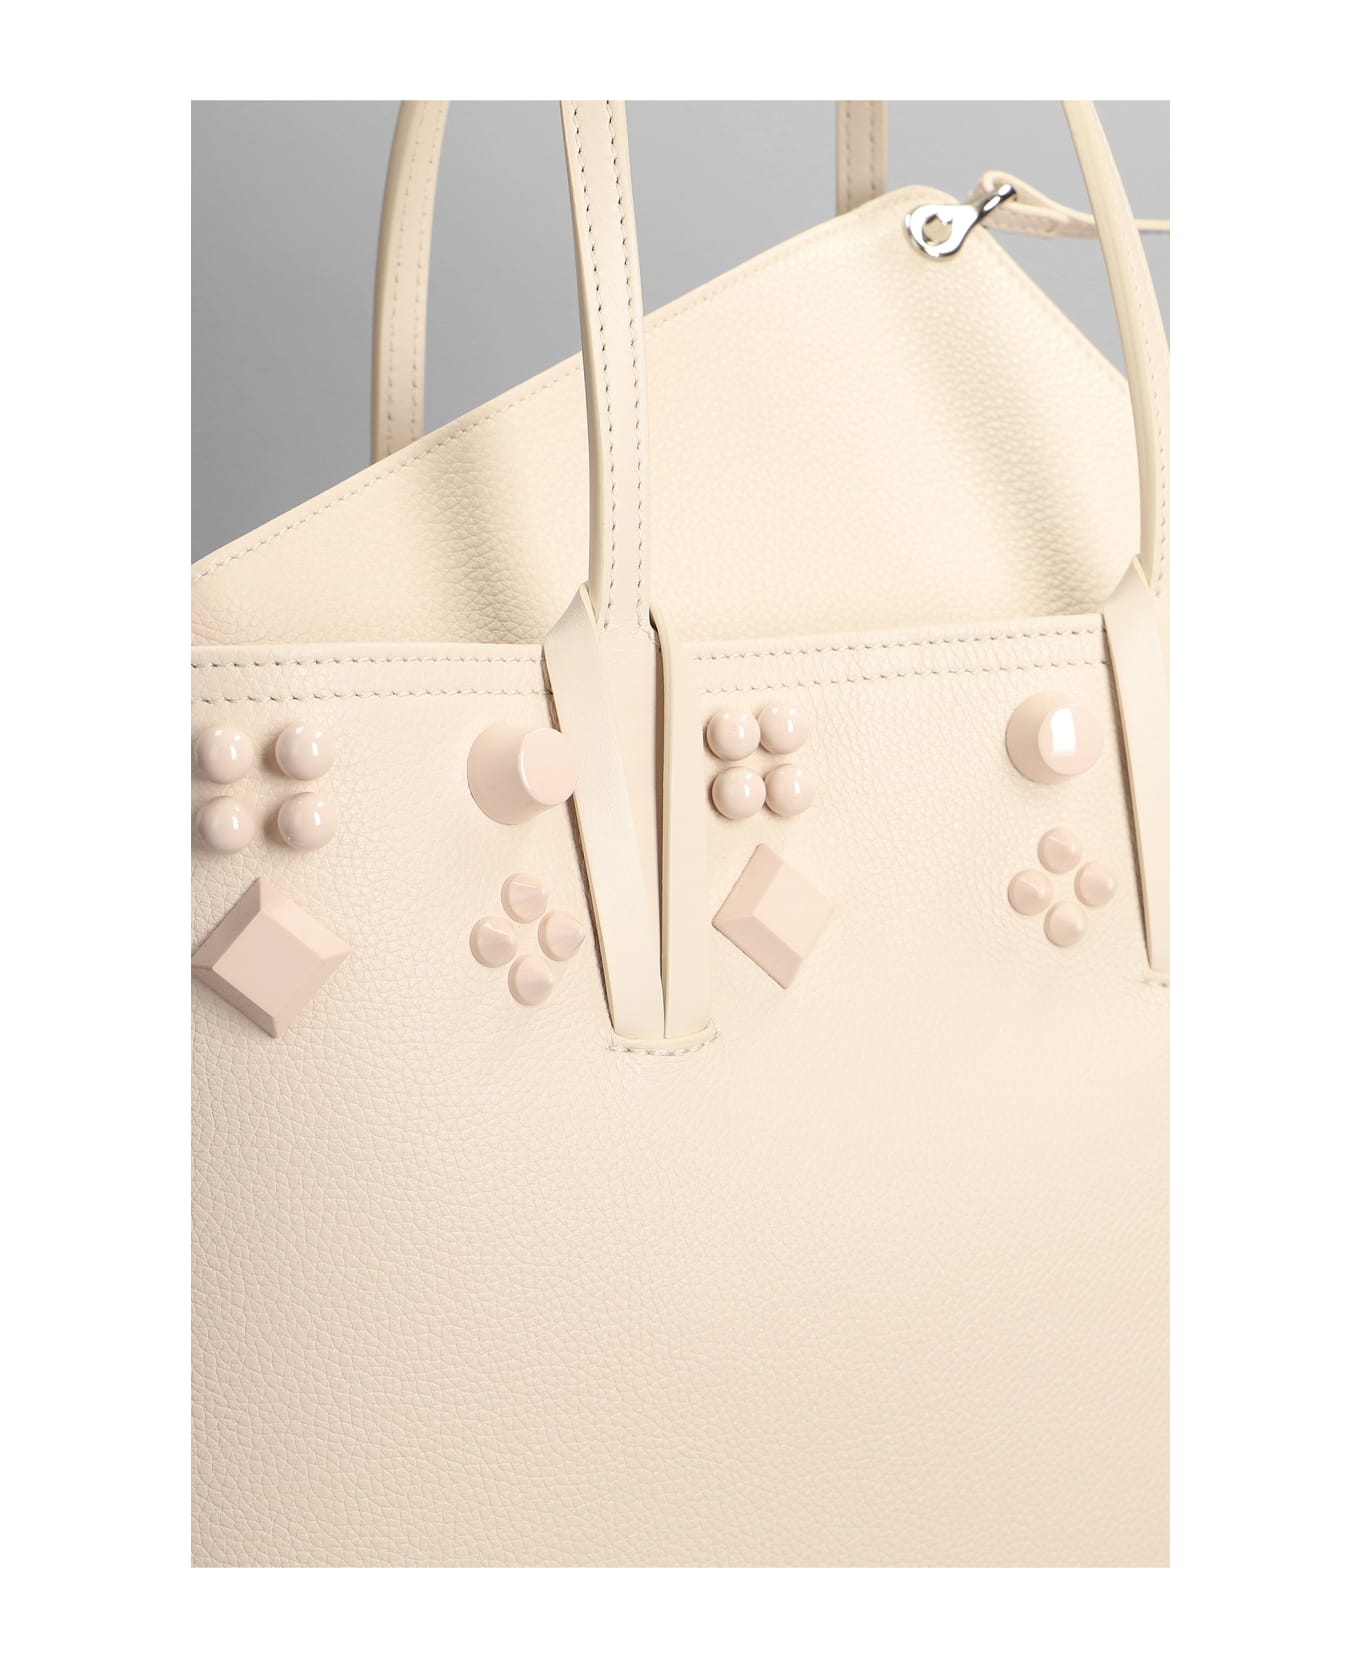 Christian Louboutin Cabata Tote In Powder Leather - Nude & Neutrals トートバッグ